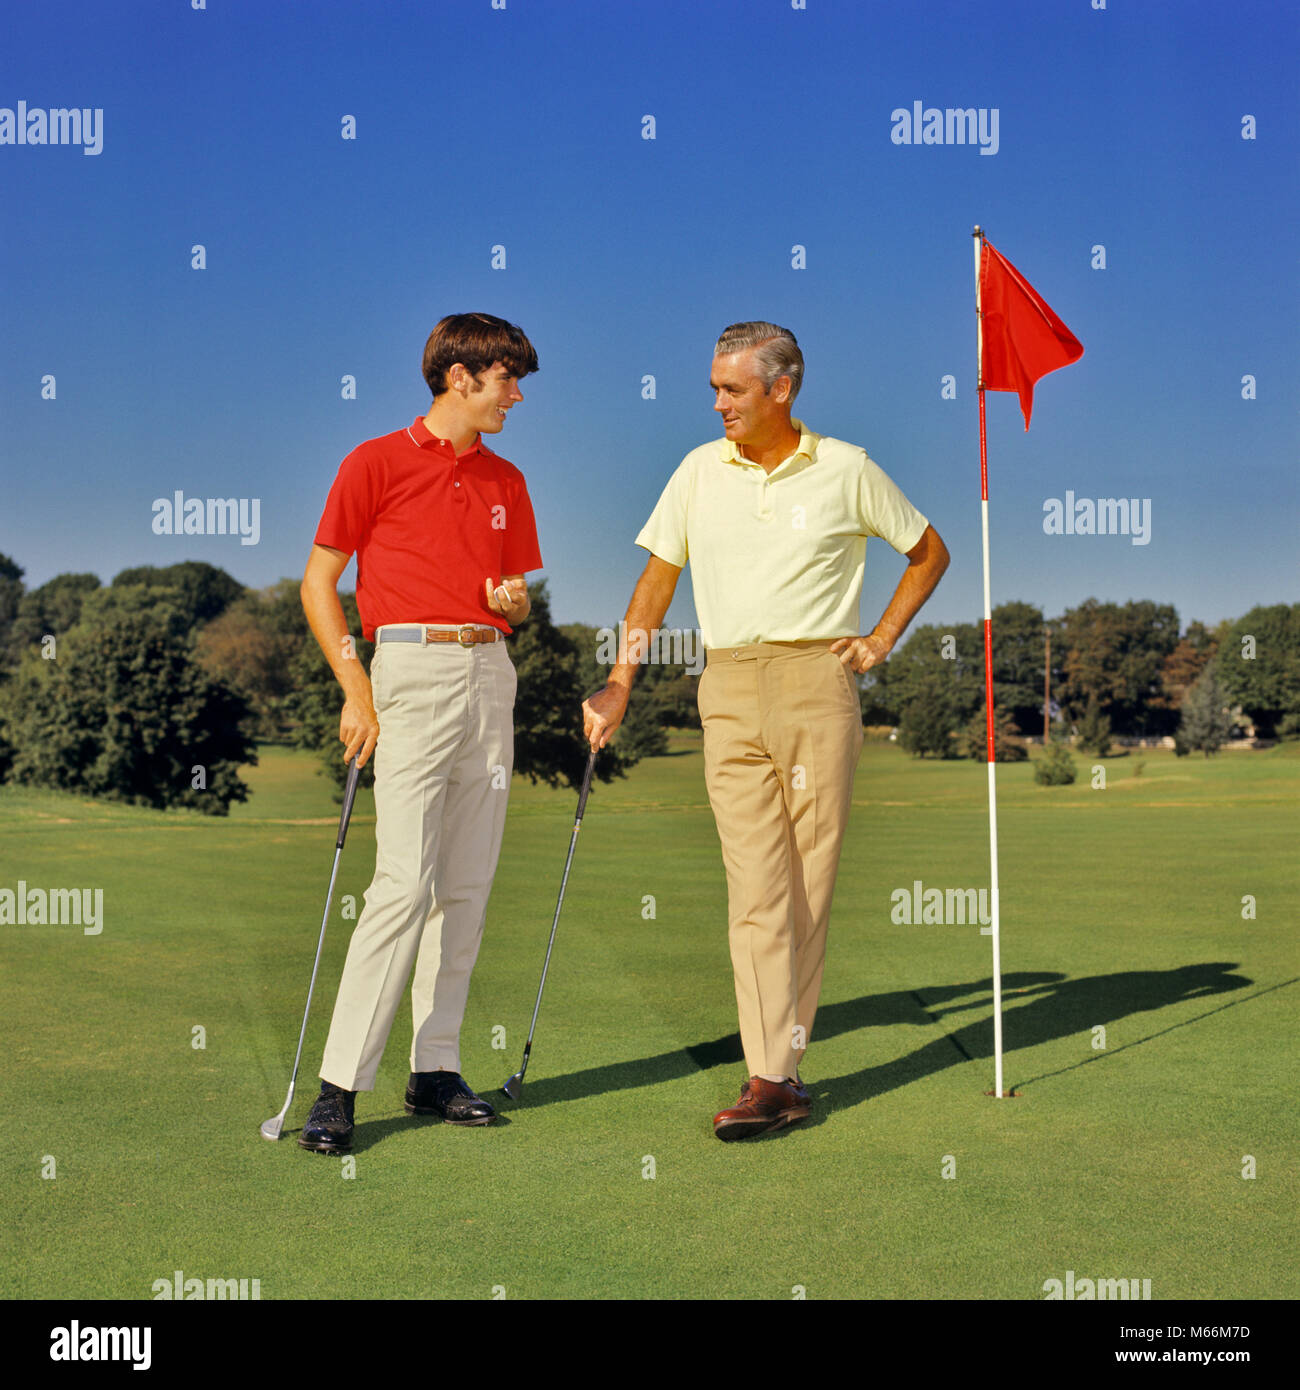 1960s 1970s TEENAGE BOY AND MIDDLEAGED FATHER ON GOLF COURSE GREEN LEANING ON CLUBS TALKING - kg3983 HAR001 HARS EXERCISING HEALTH SPEAKING CLOTHING LISTENING NOSTALGIC PAIR STYLISH SUBURBAN COLOR OLD TIME TEACHING LEANING OLD FASHION 1 FITNESS JUVENILE STYLE COMMUNICATION HEALTHY TEAMWORK TWO PEOPLE COMPETITION CAUCASIAN ATHLETE SONS PLEASED JOY LIFESTYLE SATISFACTION CELEBRATION COPY SPACE FRIENDSHIP FULL-LENGTH ADOLESCENT INSPIRATION CARING TEENAGE BOY ATHLETIC CONFIDENCE NOSTALGIA FATHERS CLUBS TOGETHERNESS 16-17 YEARS 40-45 YEARS 45-50 YEARS SUCCESS ACTIVITY COURSE DREAMS HAPPINESS Stock Photo